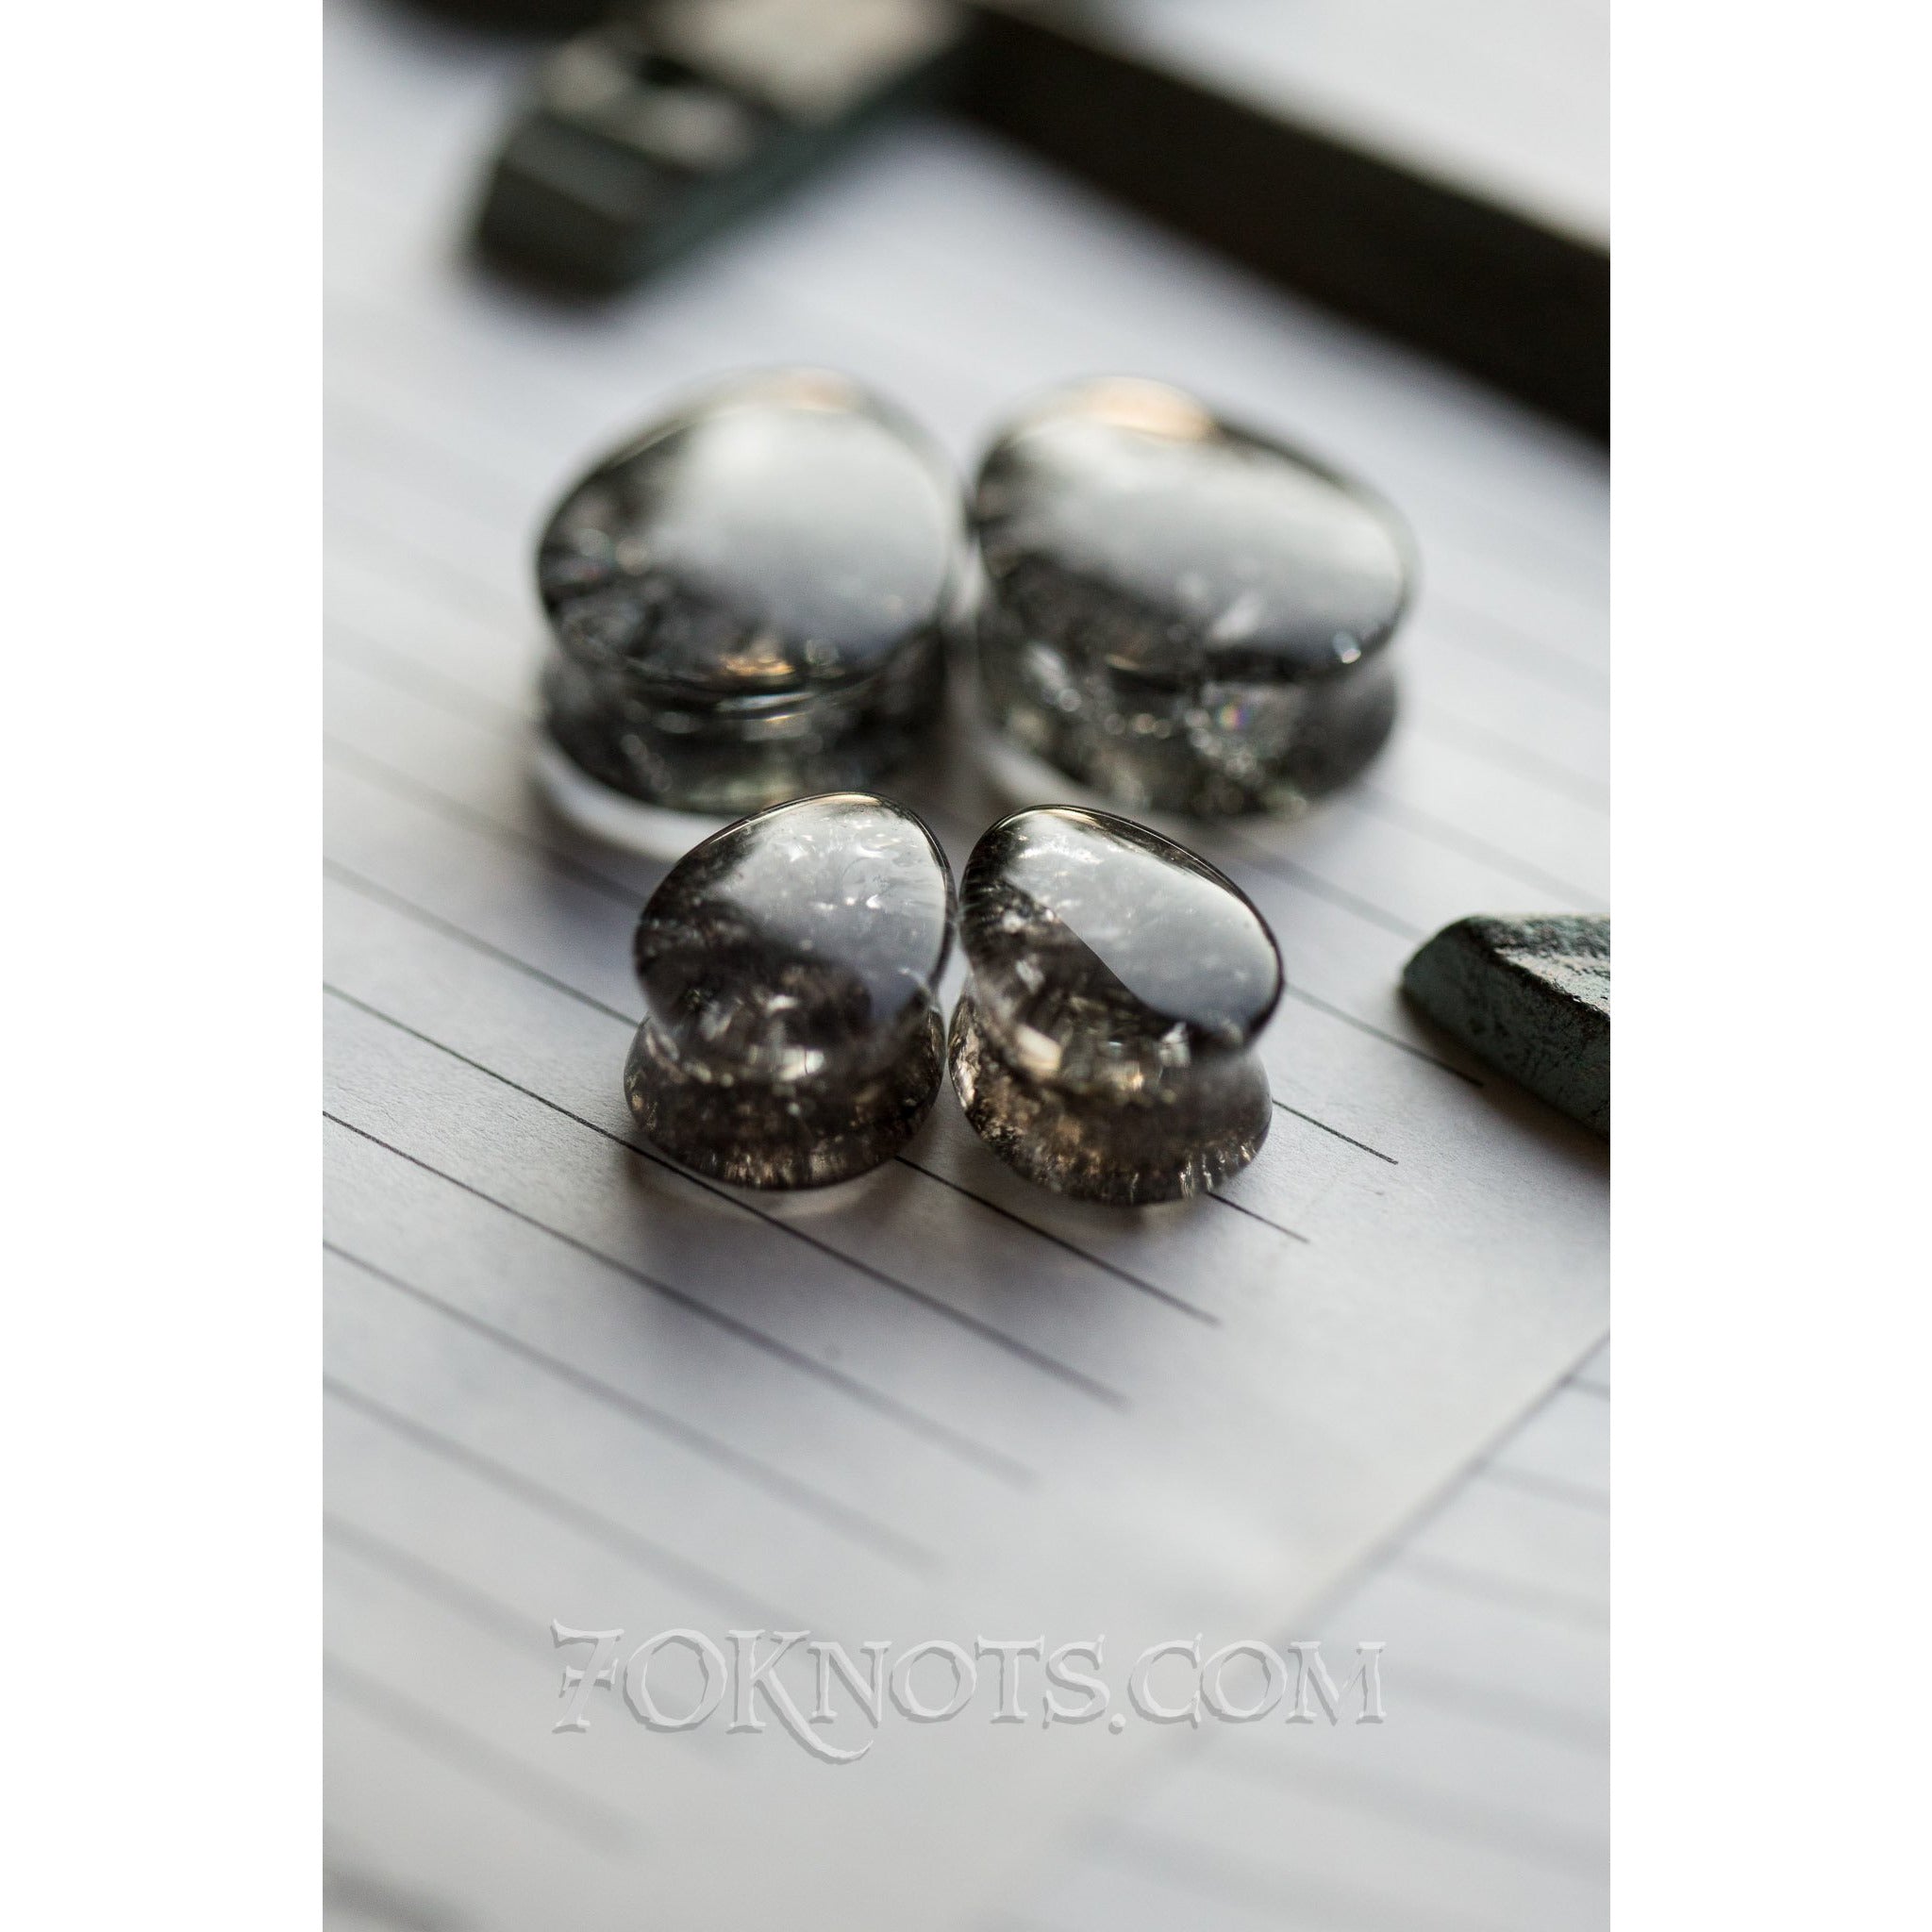 Teardrop Black Cracked Glass Double Flared Plugs, Pair - 70 Knots